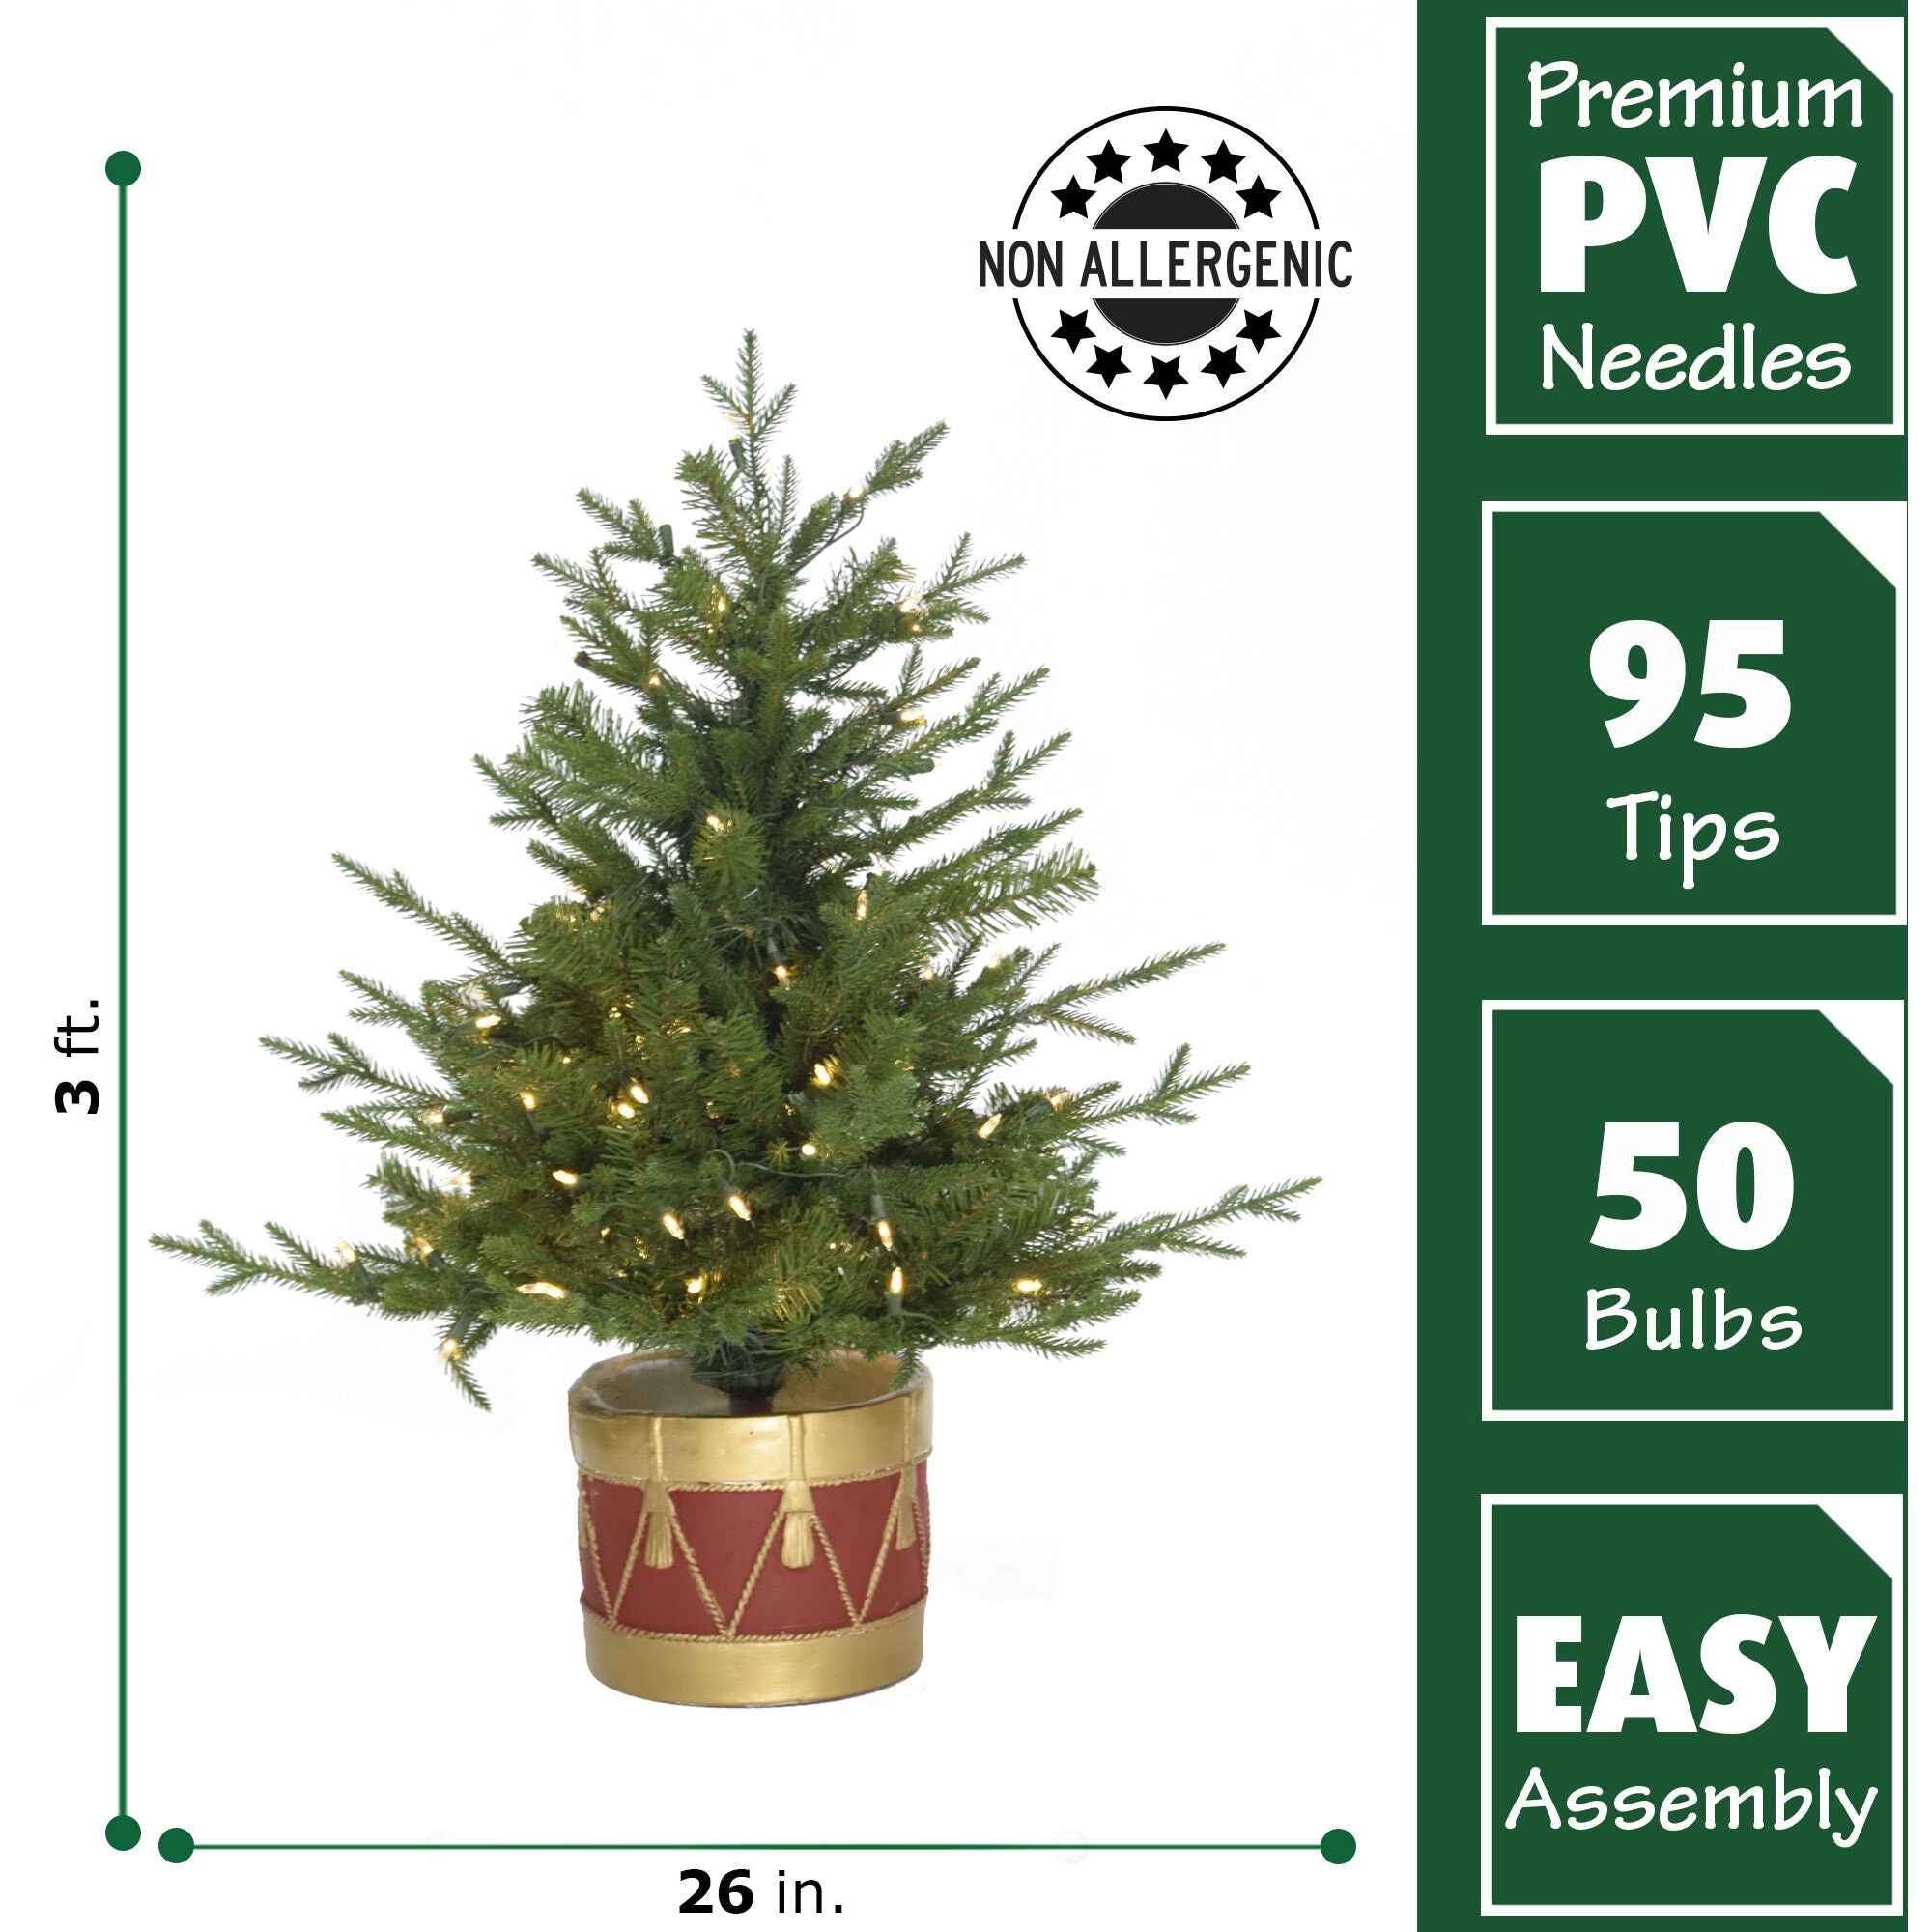 Fraser Hill Farm -  3.0-Ft Adirondack Pre Lit Potted Christmas Tree Decor with Warm White LED Lights